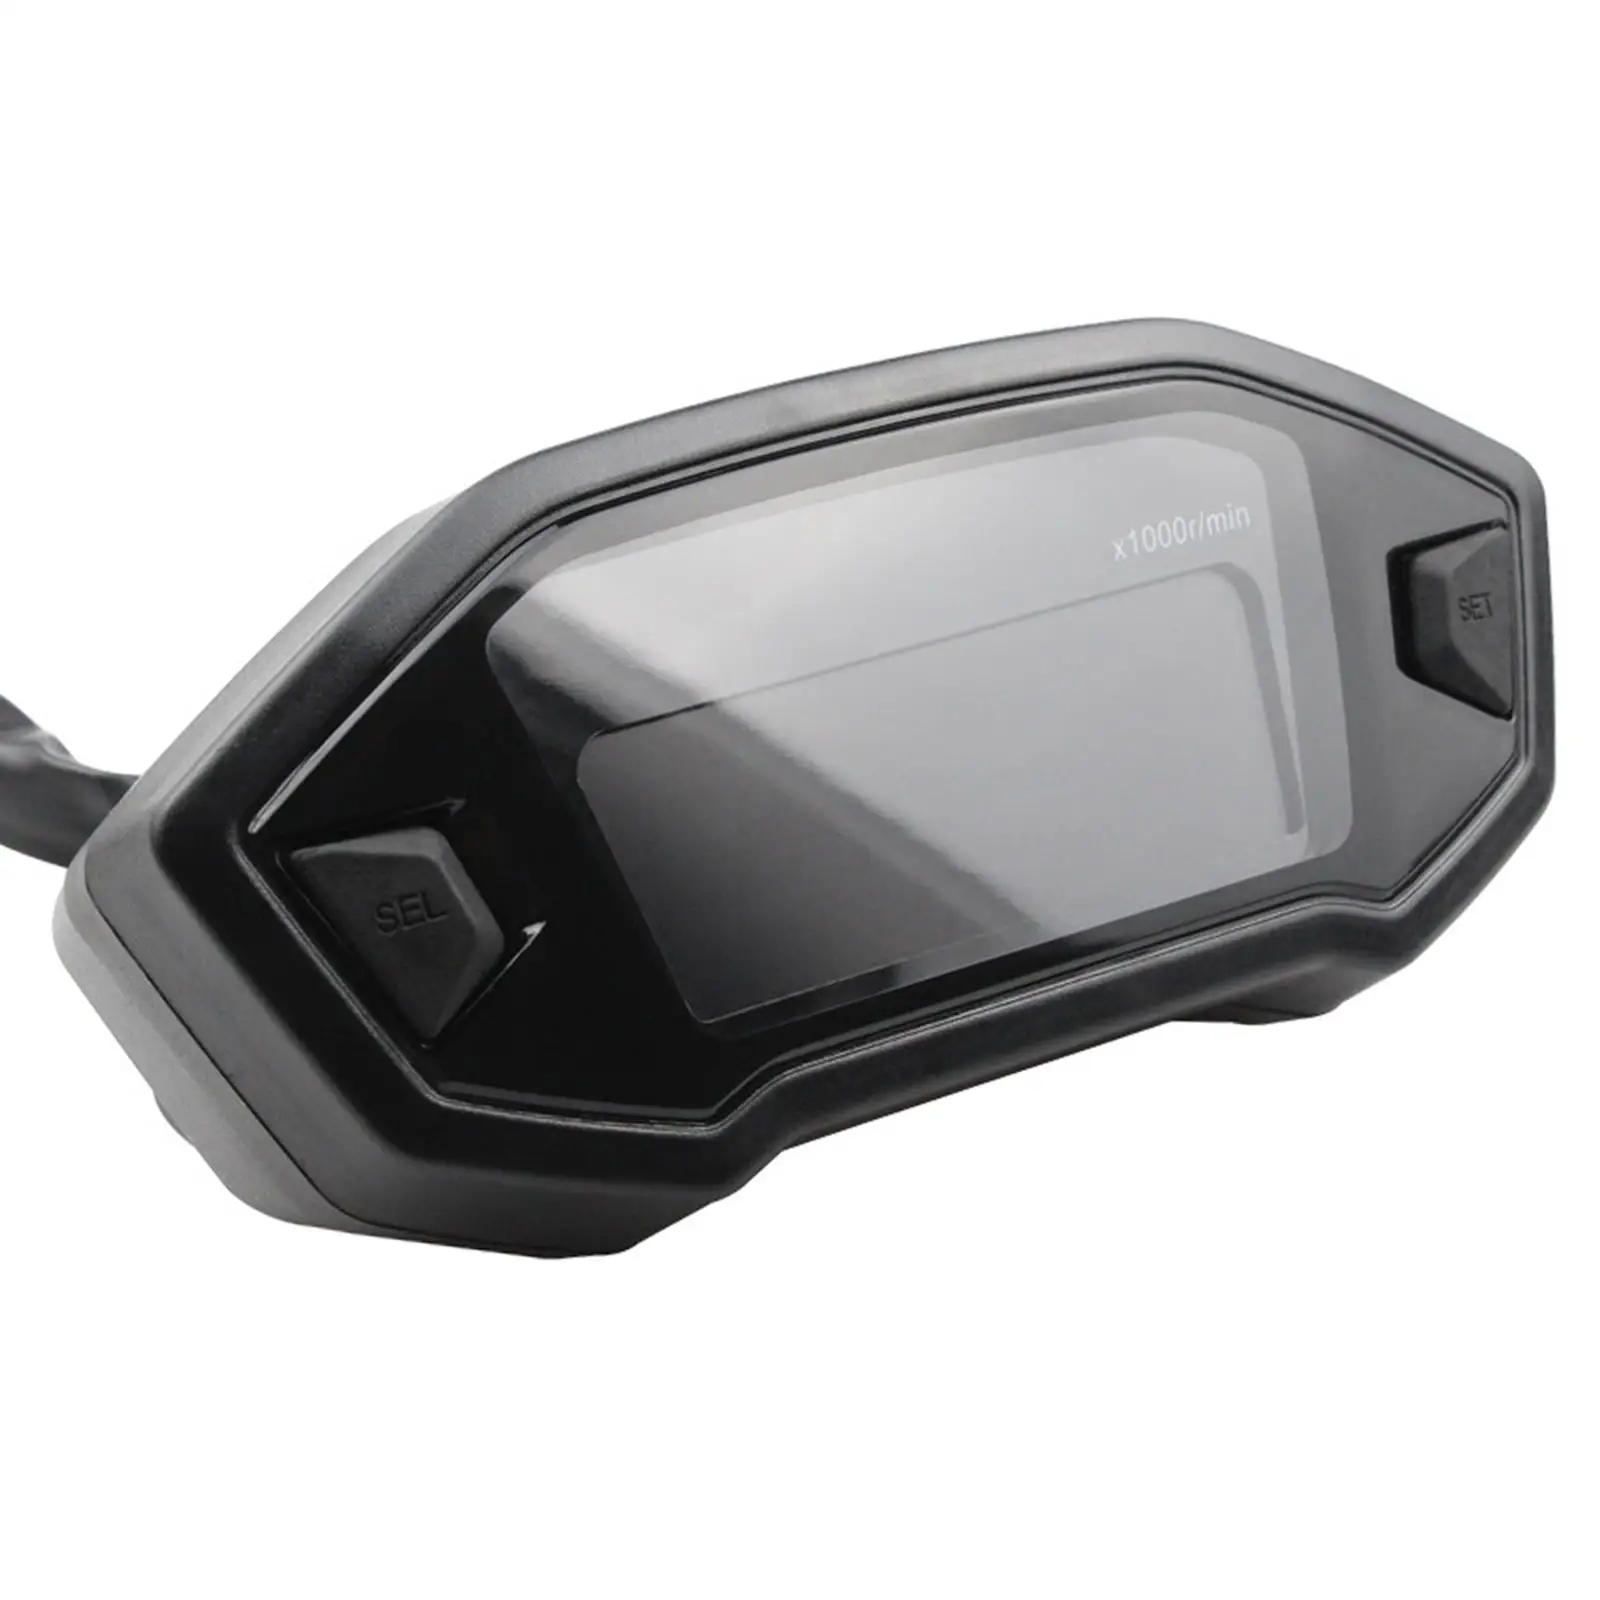 Motorcycle LCD Screen Digital  Universal DC 12V Easily Install Replaces , Speed Display in Kilometers or Miles